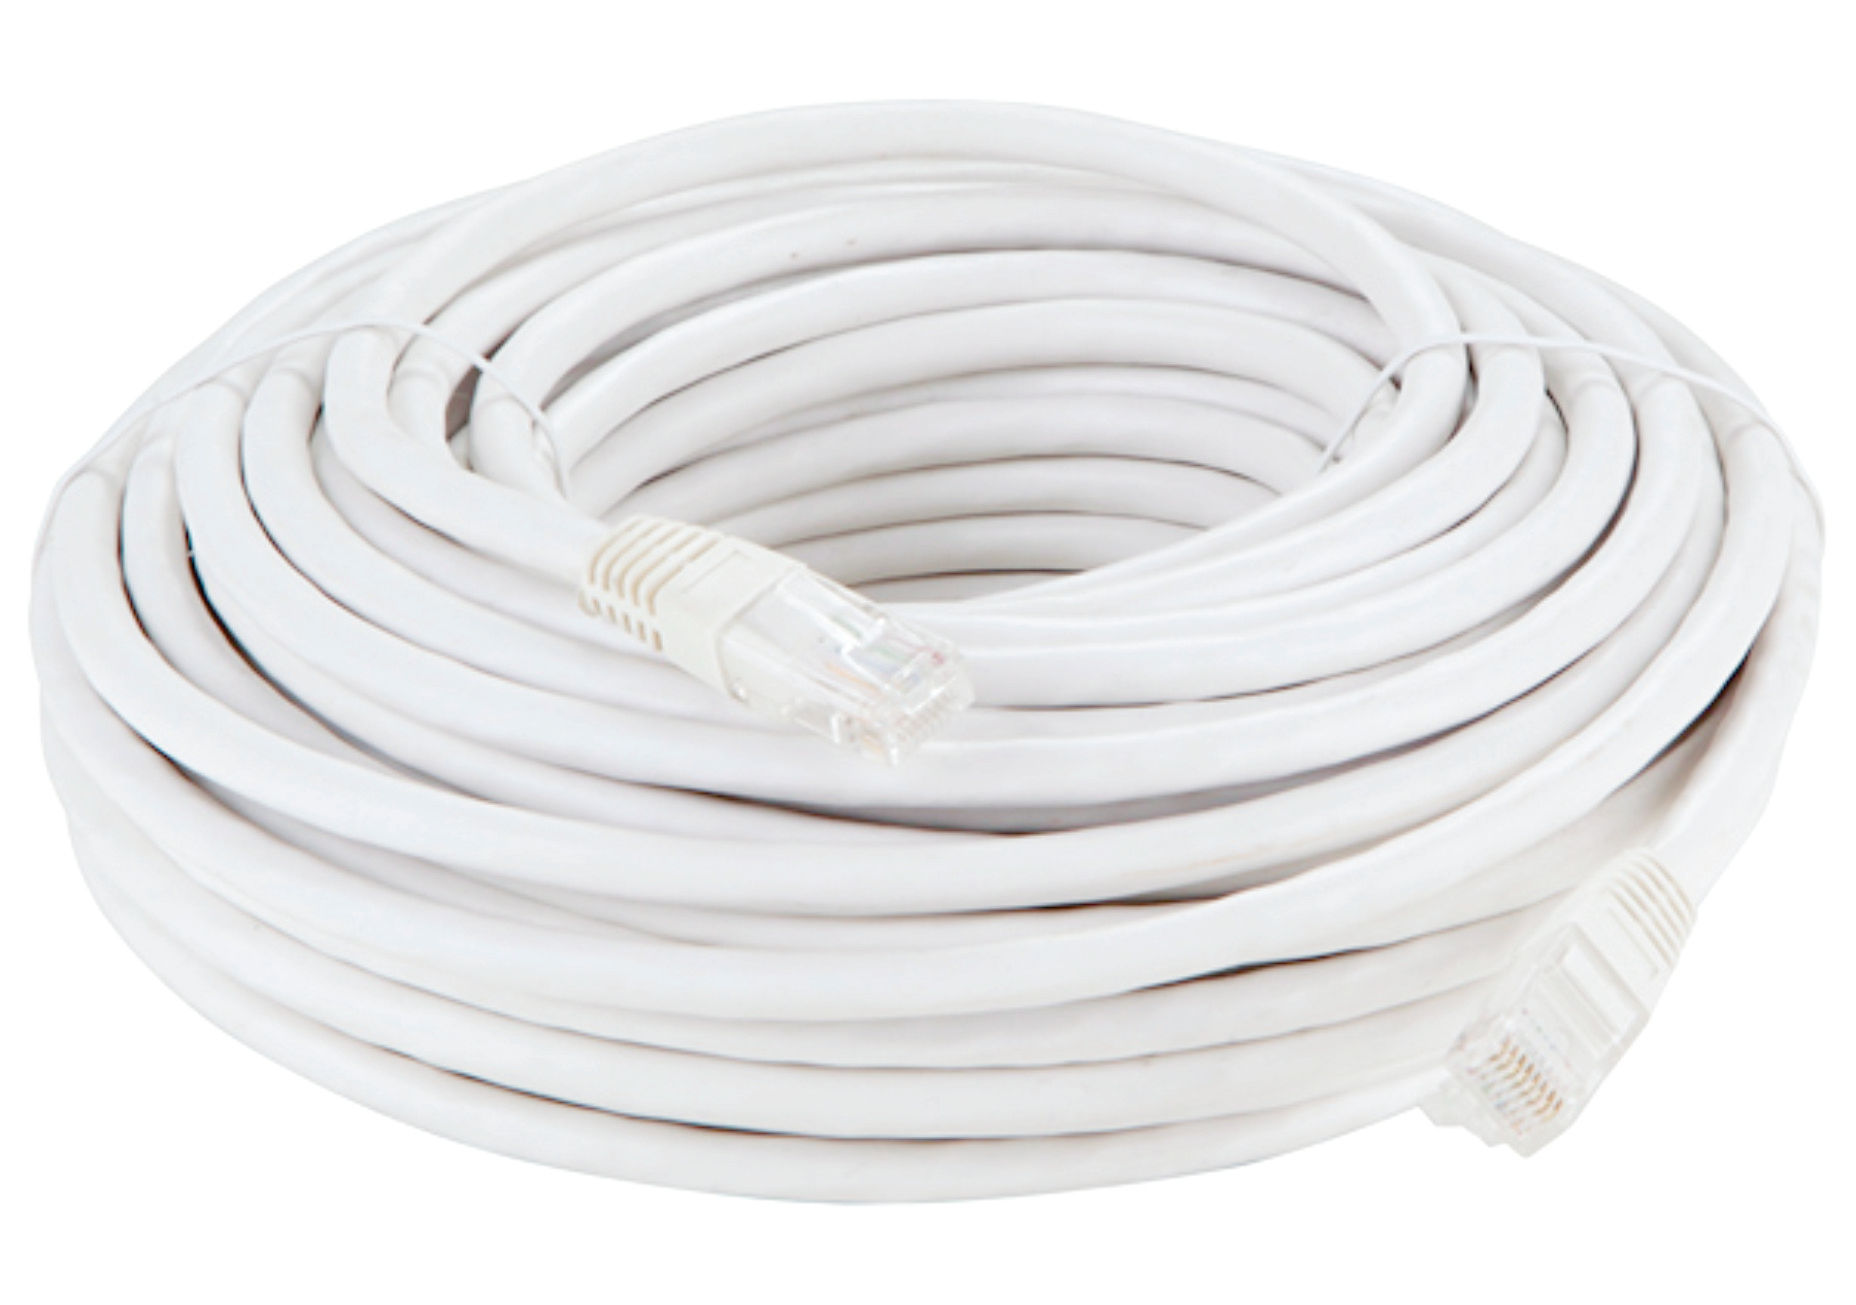 Network Cable (Cat6 - 100M Role)